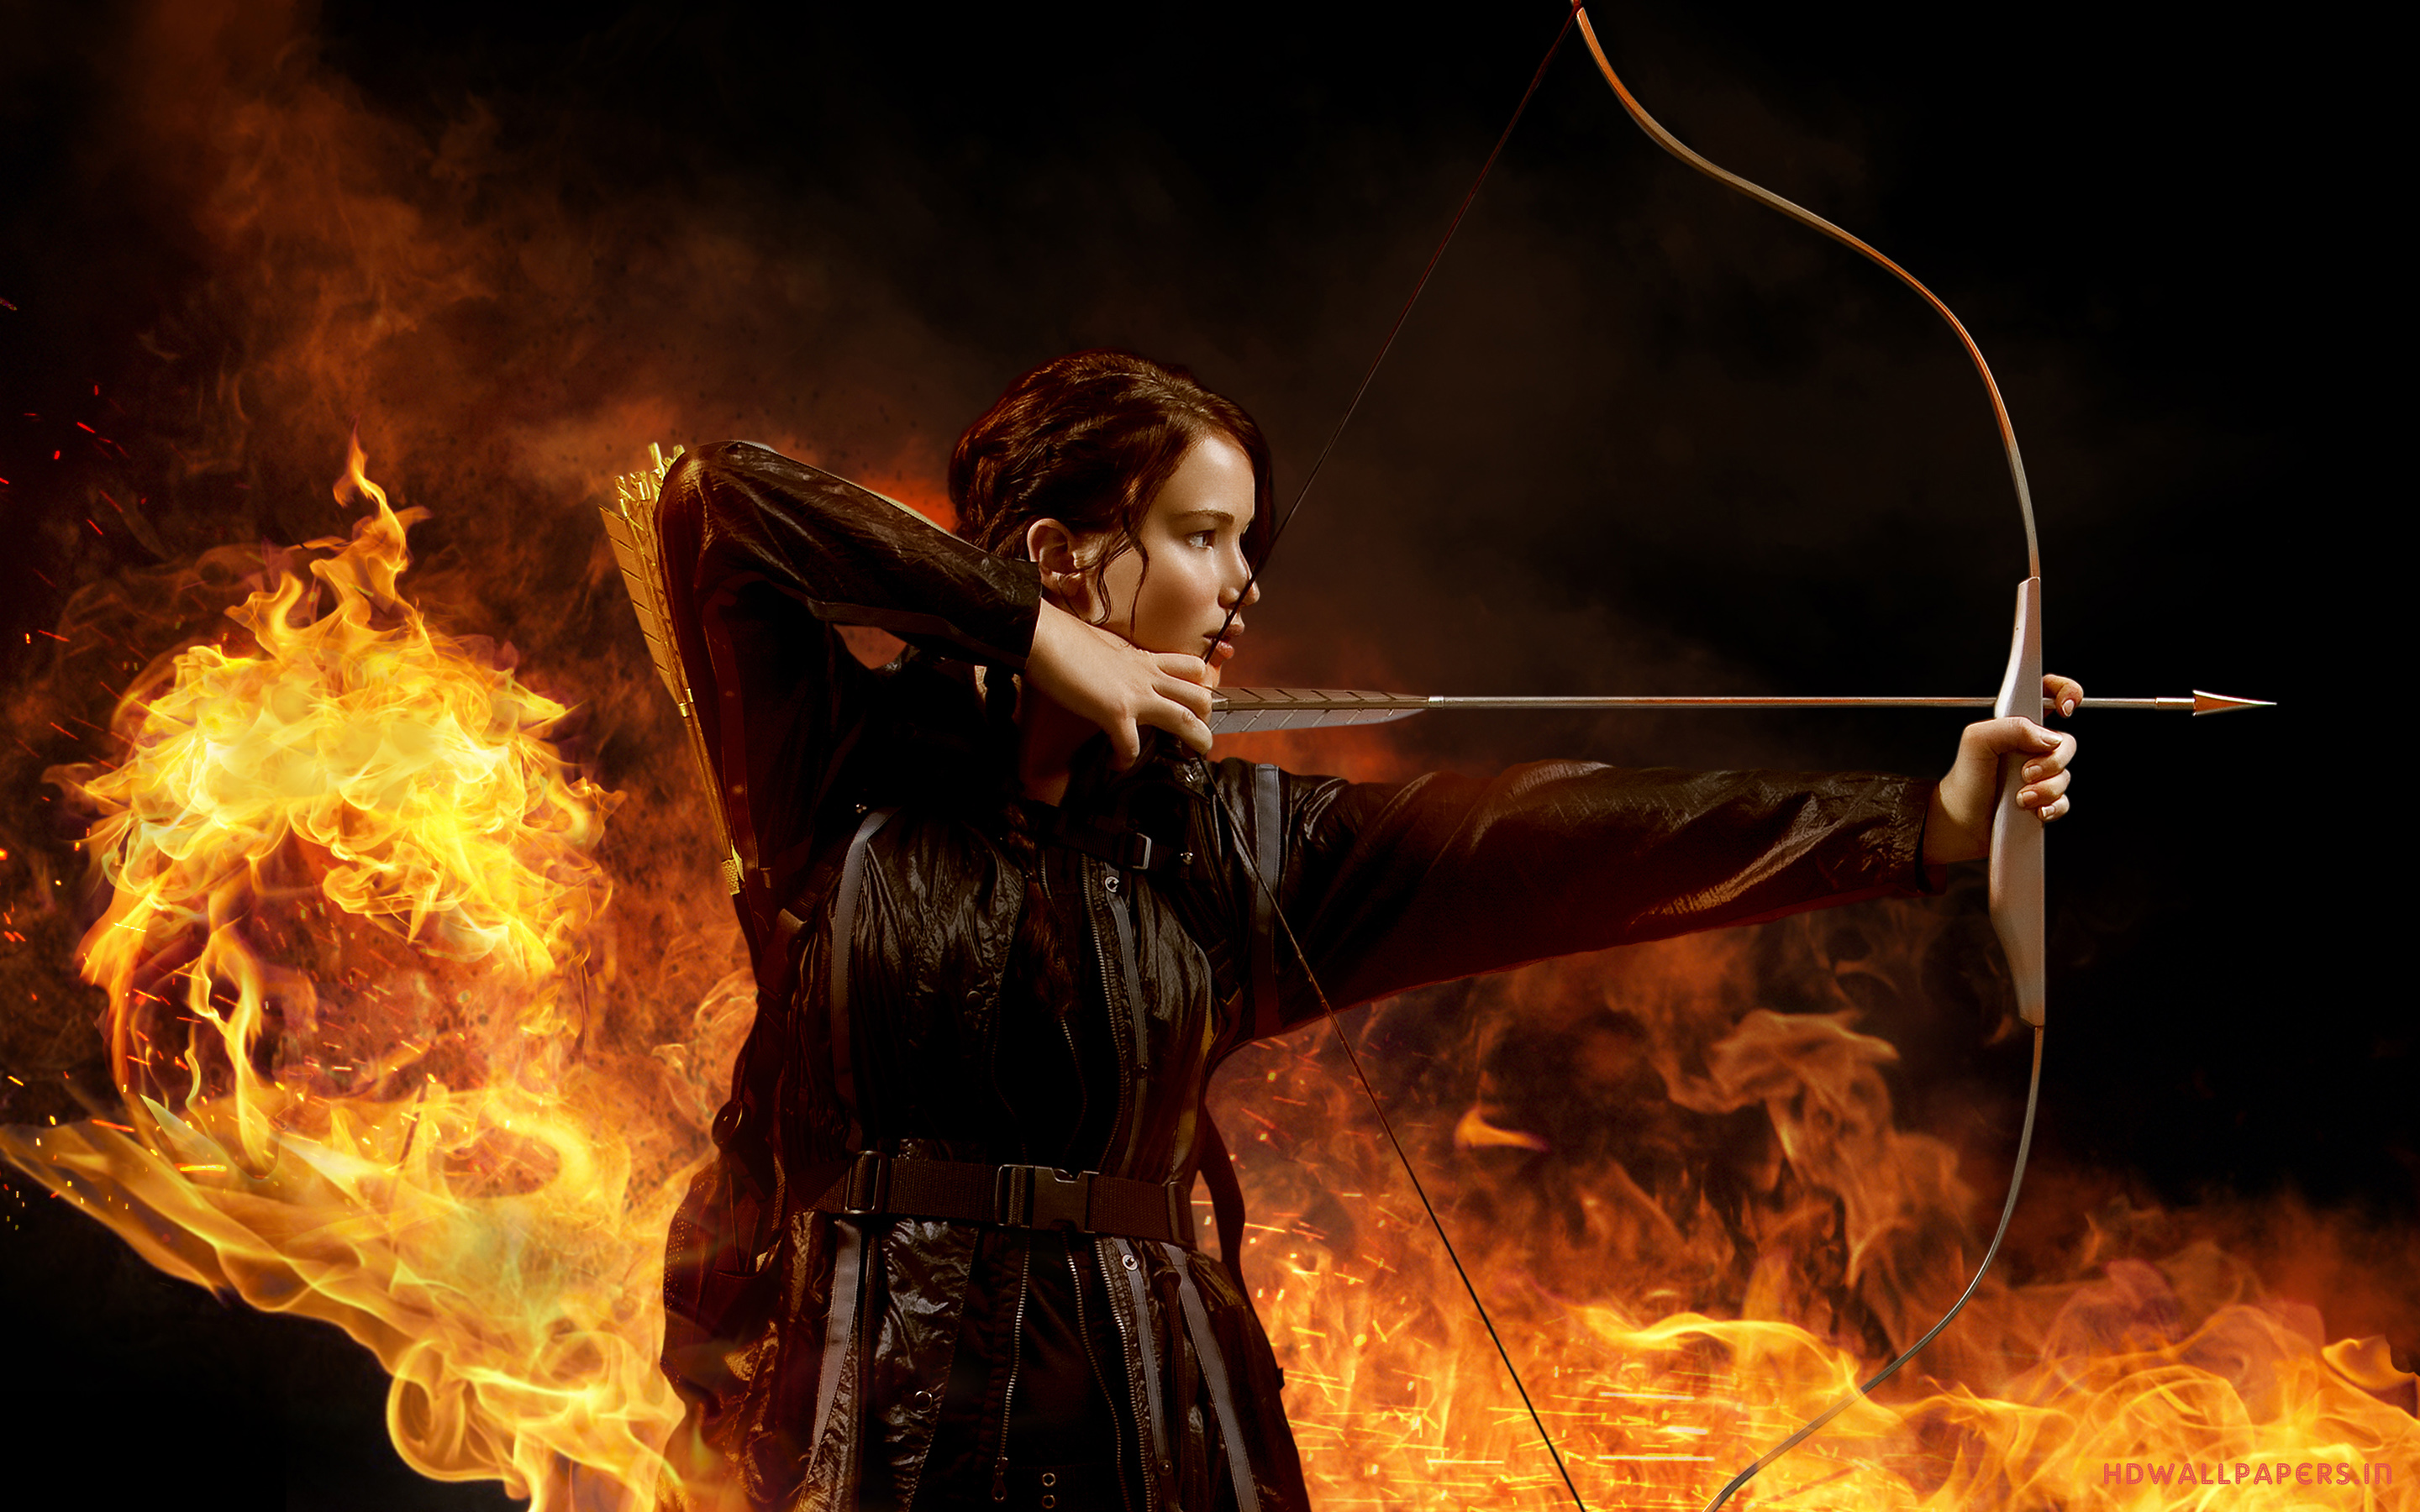 Jennifer Lawrence in The Hunger Games Wallpapers HD Wallpapers 2880x1800